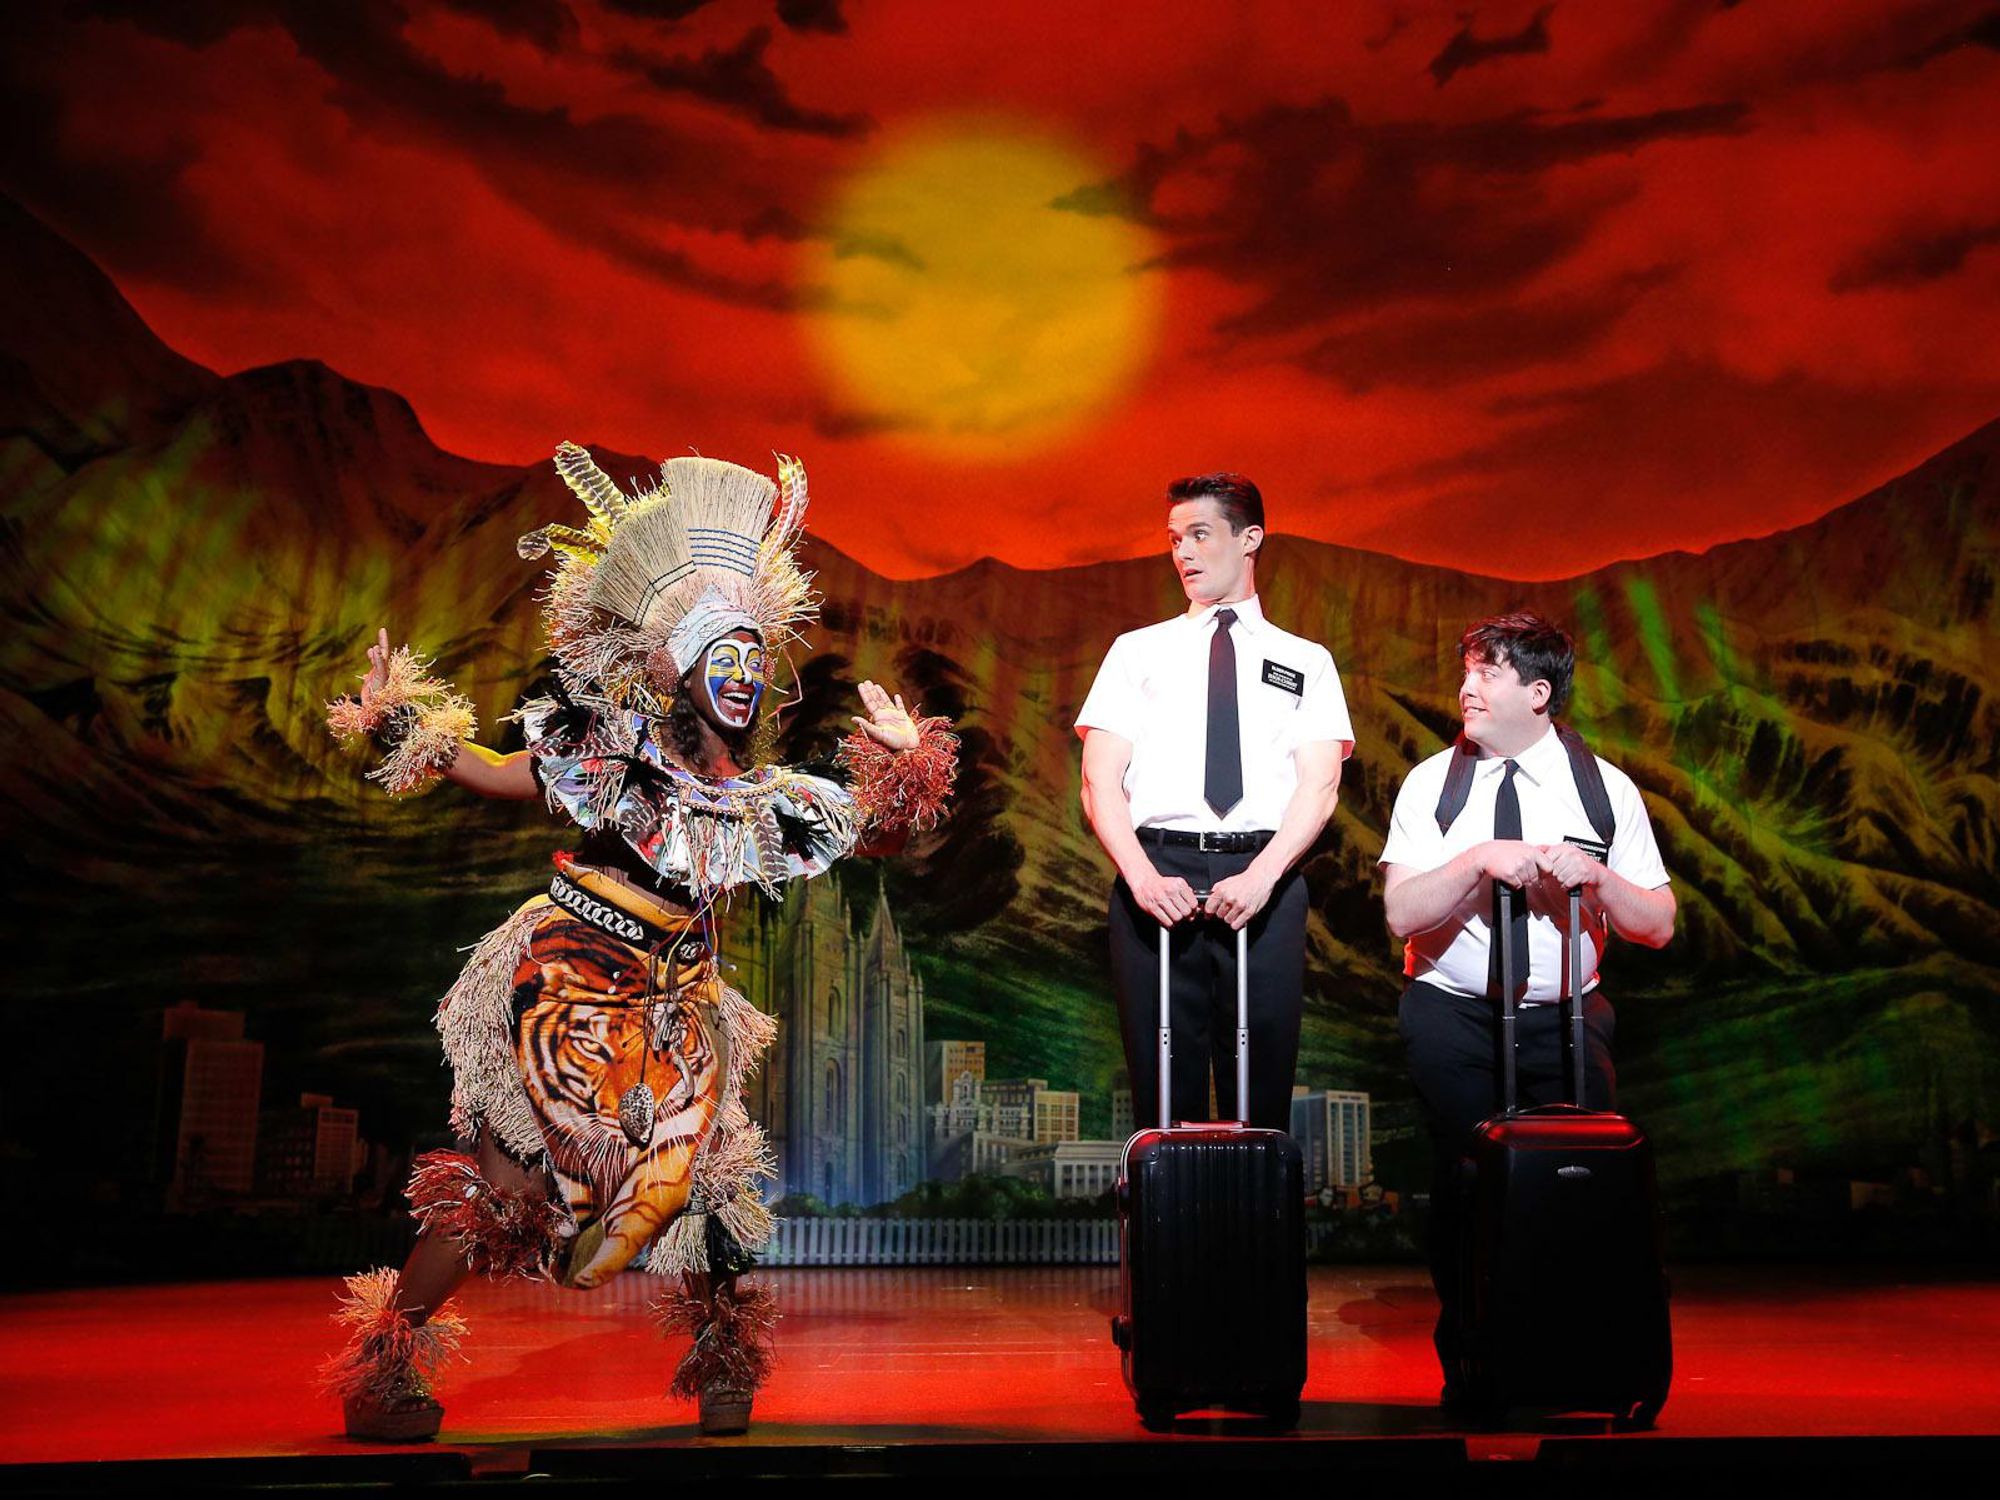 The Book of Mormon returns to the Winspear Opera House, playing through February 22.